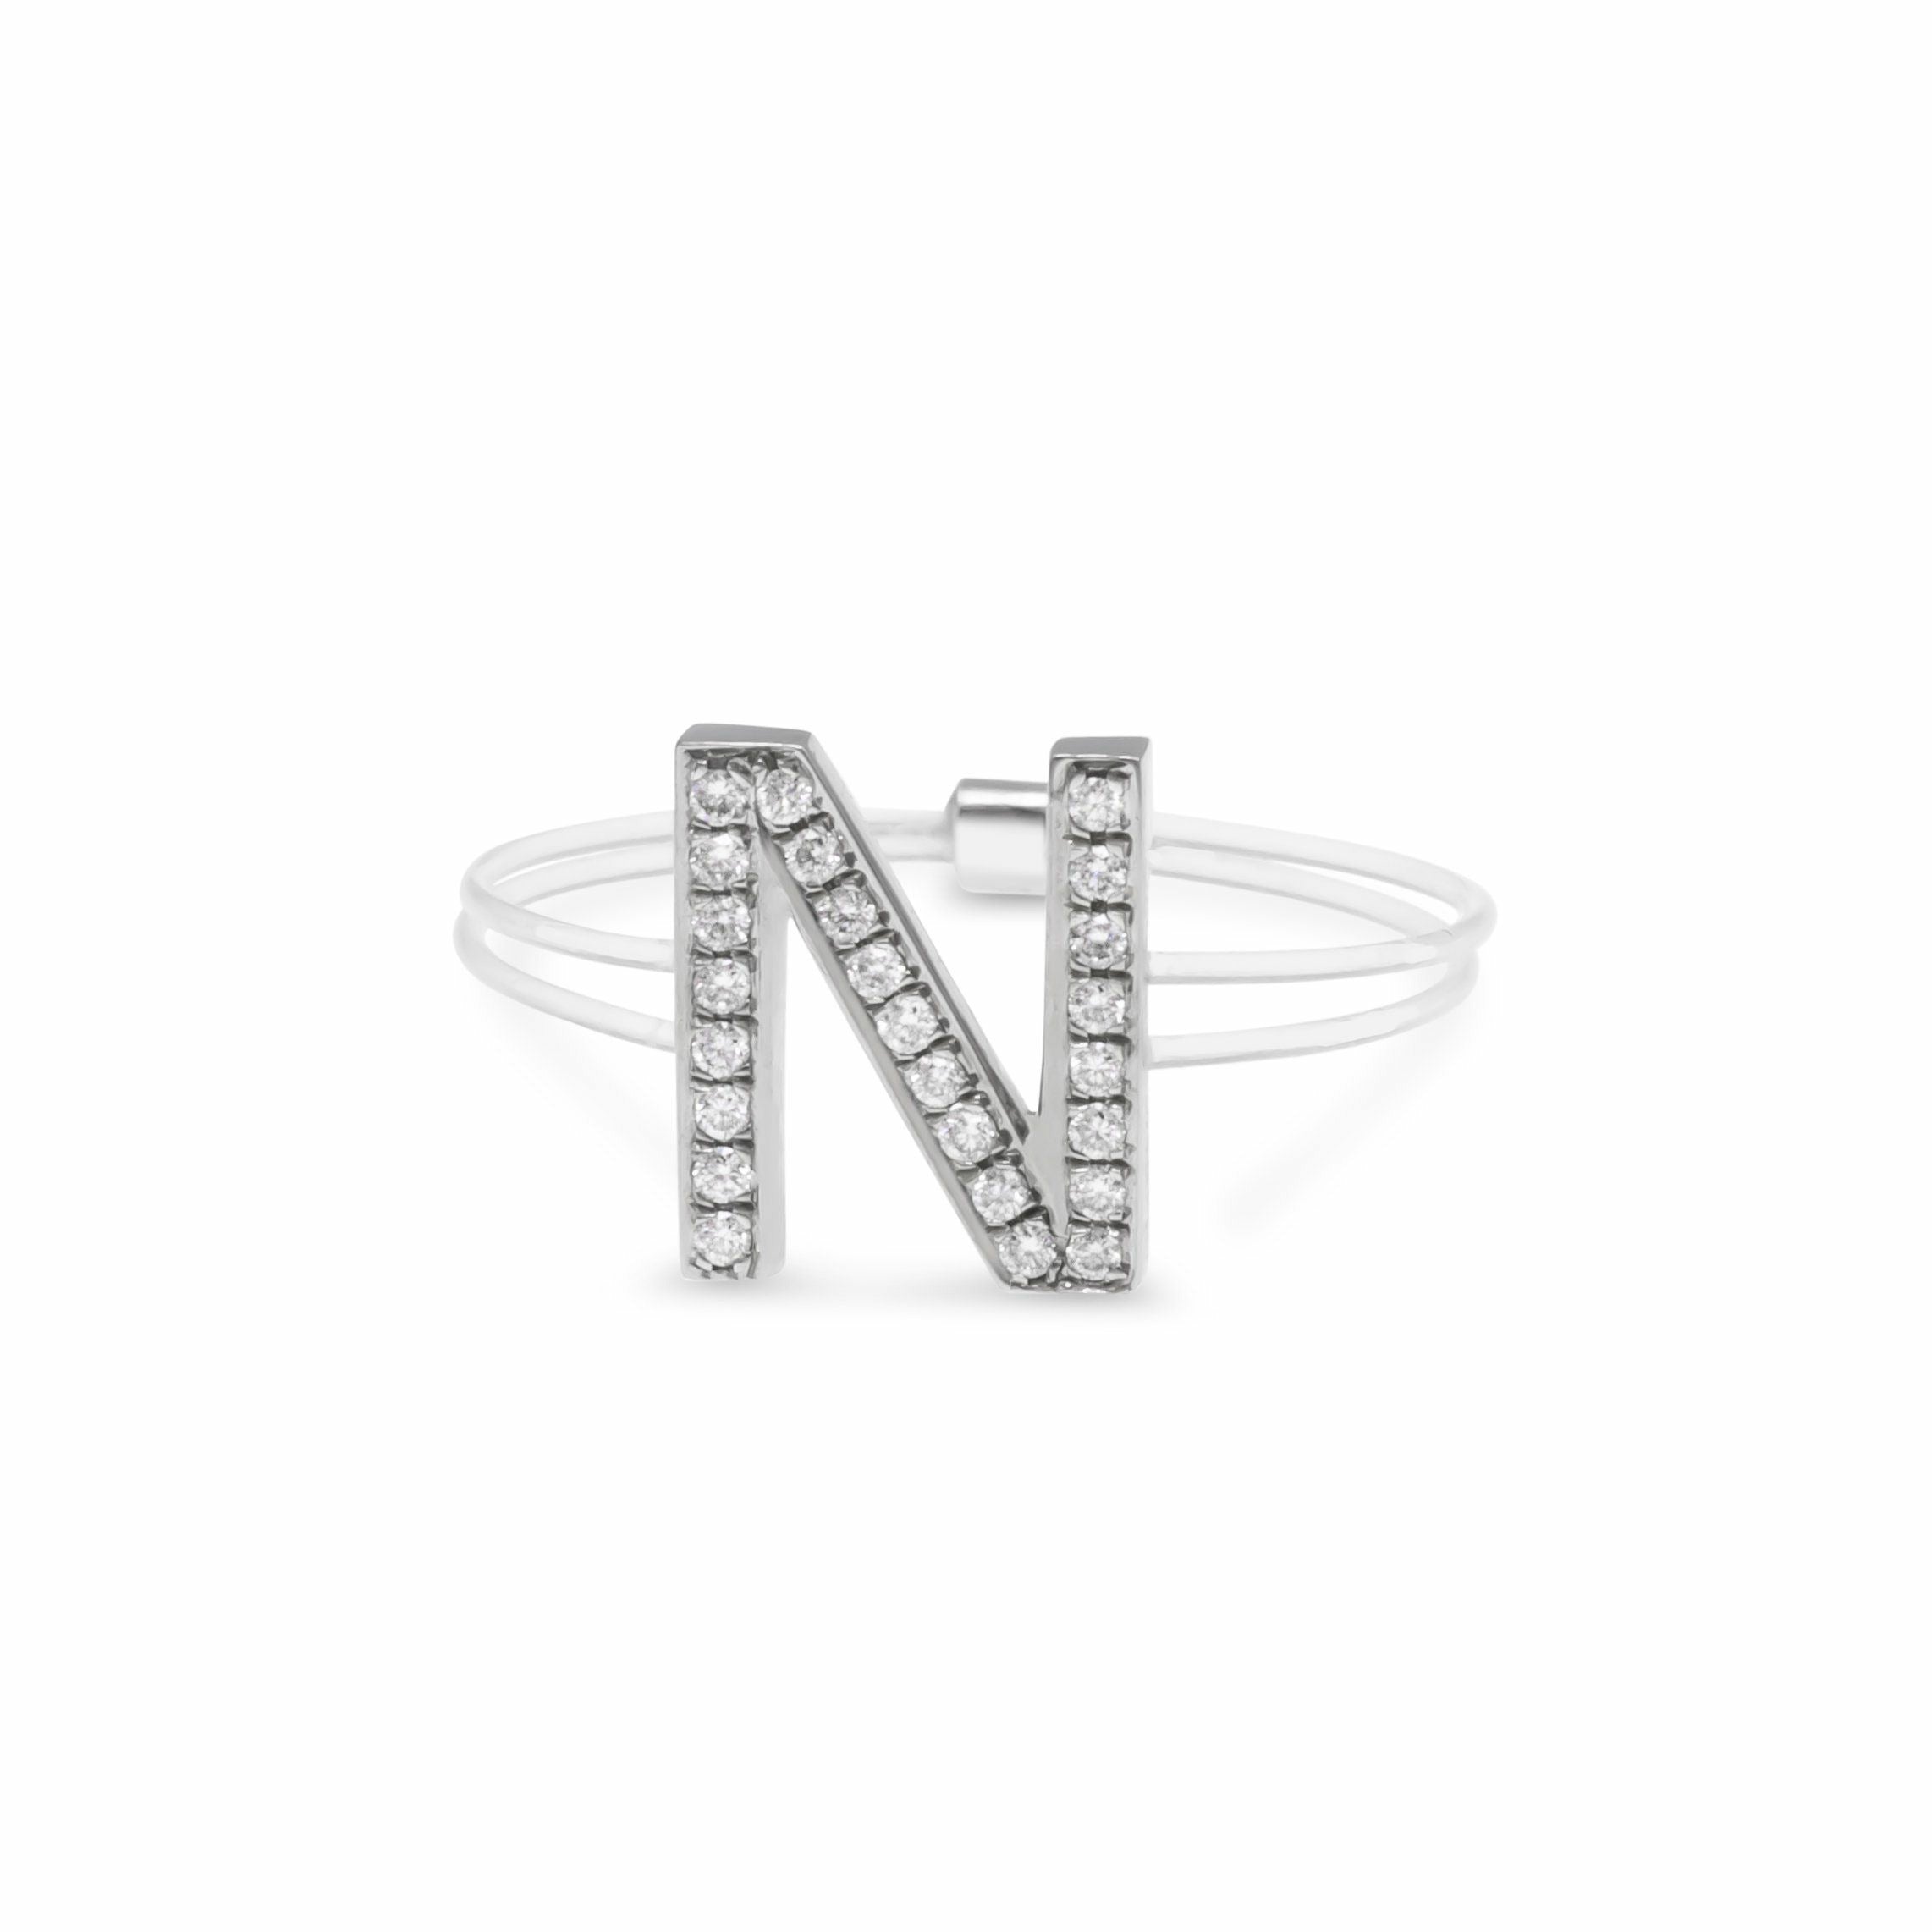 Invisible Initial White Diamond Ring freeshipping - Cocobycaroline